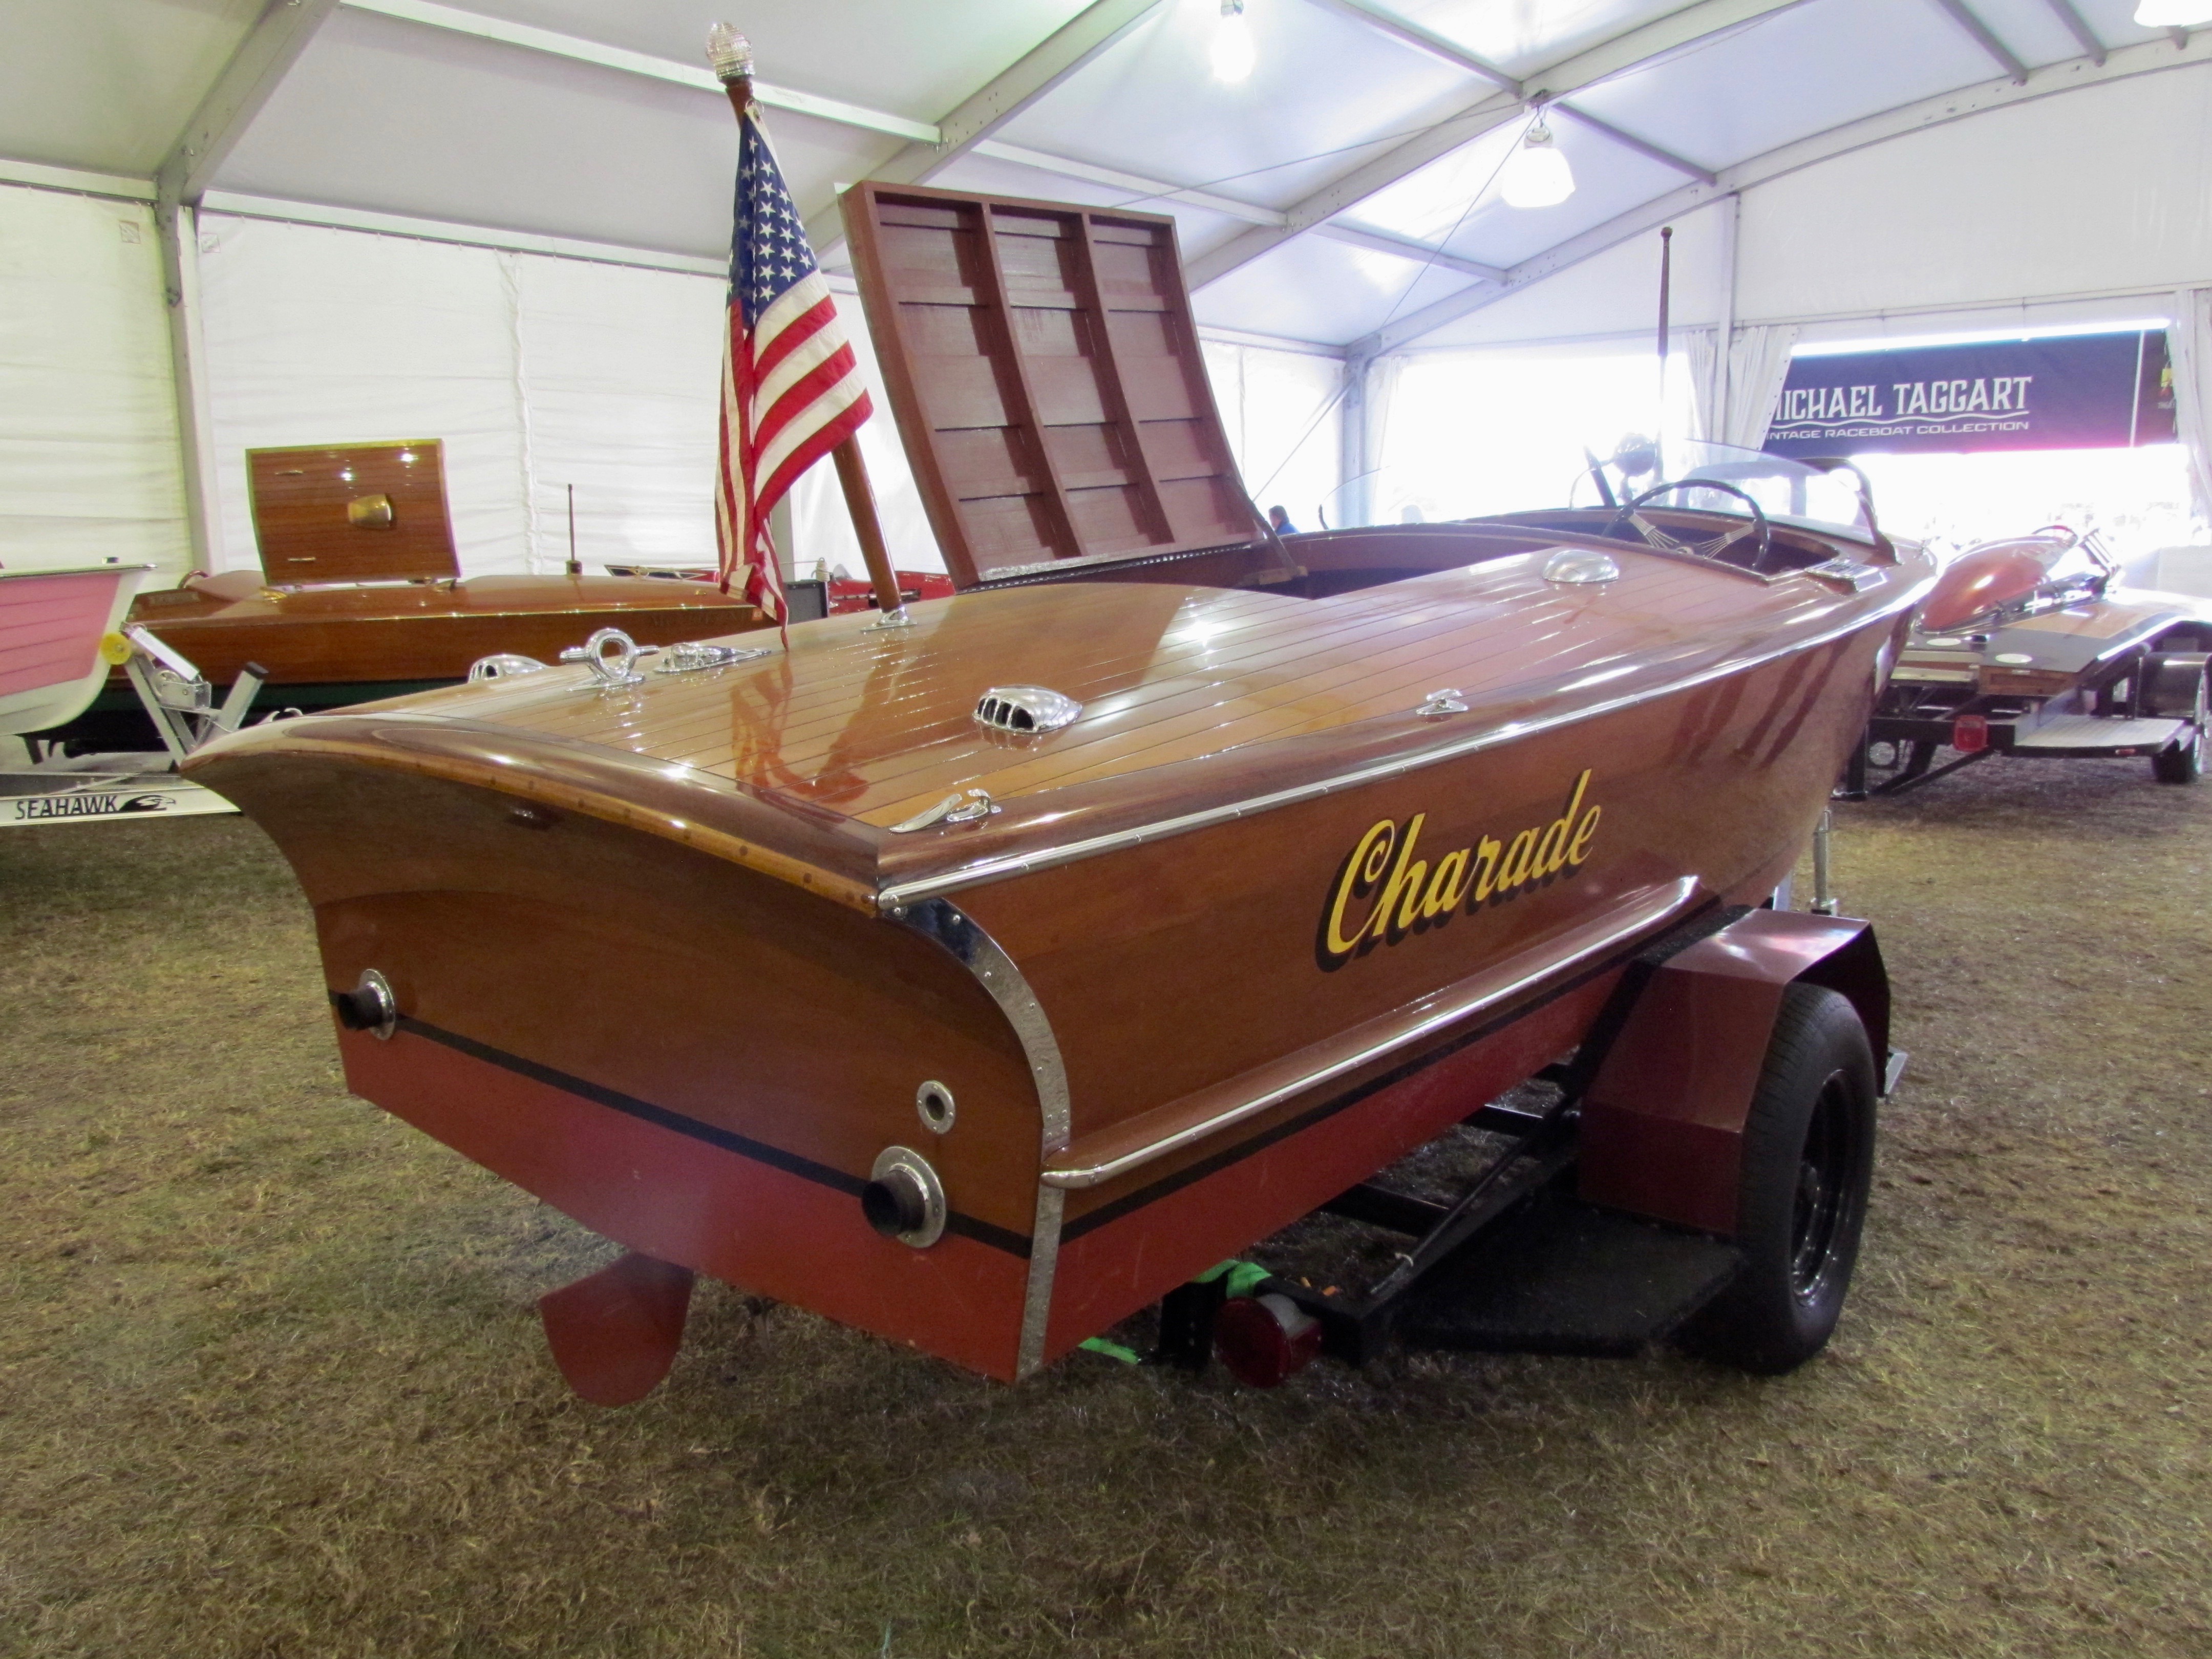 Mecum floats Taggart boat collection at Kissimmee sale